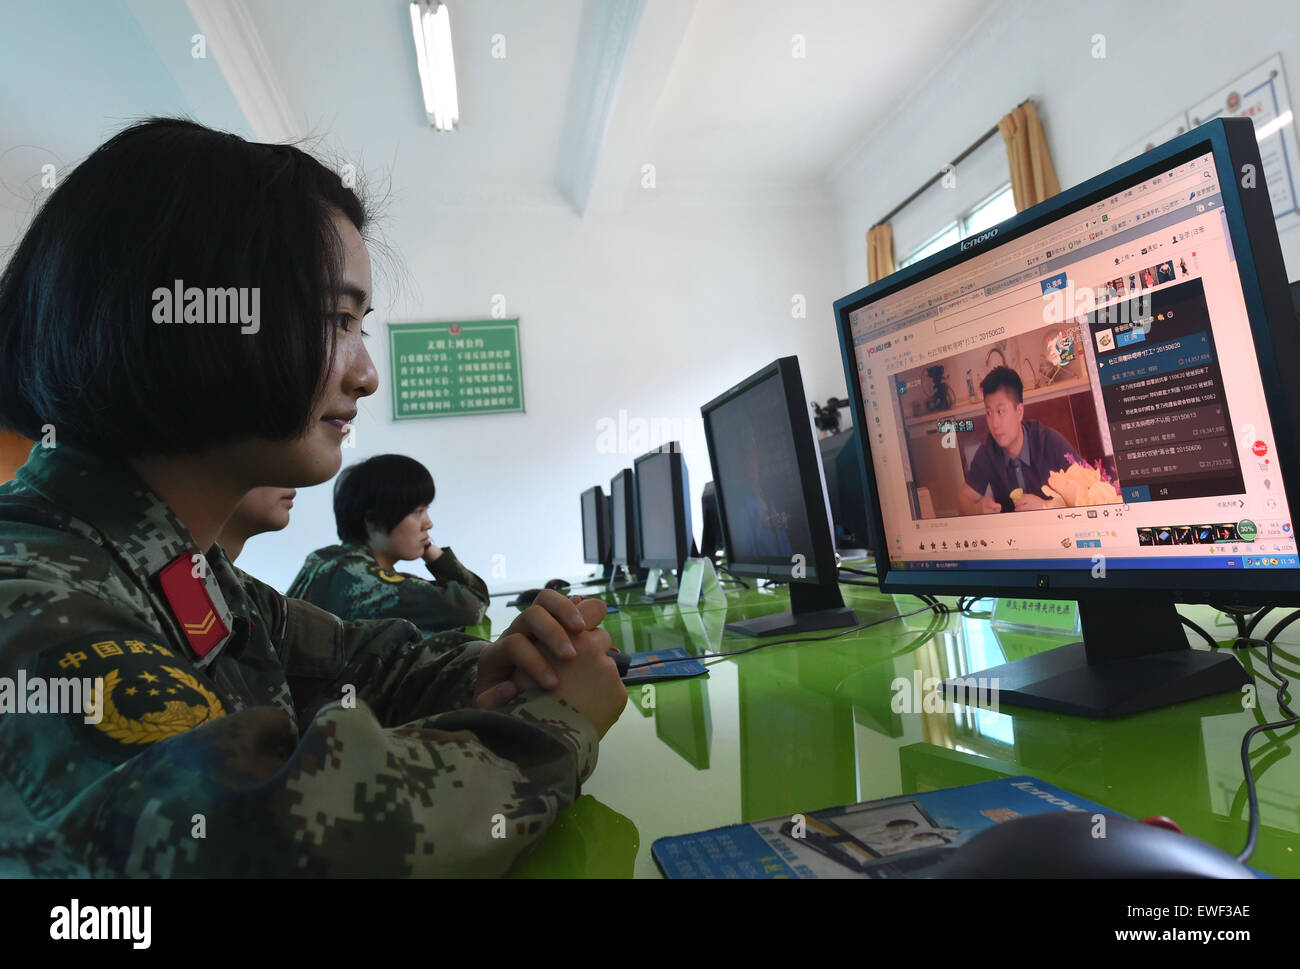 (150625) -- DEHONG, June 25, 2015 (Xinhua) -- Zhang Liu watches videos on the internet at the border checkpoint of Mukang in Dehong Dai-Jingpo Autonomous Prefecture, southwest China's Yunnan Province, June 24, 2015. Born in 1995, Zhang Liu became an anti-drug soldier in border checkpoint of Mukang in 2013.  Grown up in an affluent family in central China's Hunan Province, Zhang said that being a soldier had always been her dream, which drove her to join the army after graduating from high school. Being a front line anti-drug force, the border checkpoint of Mukang has captured about 100 kilogra Stock Photo